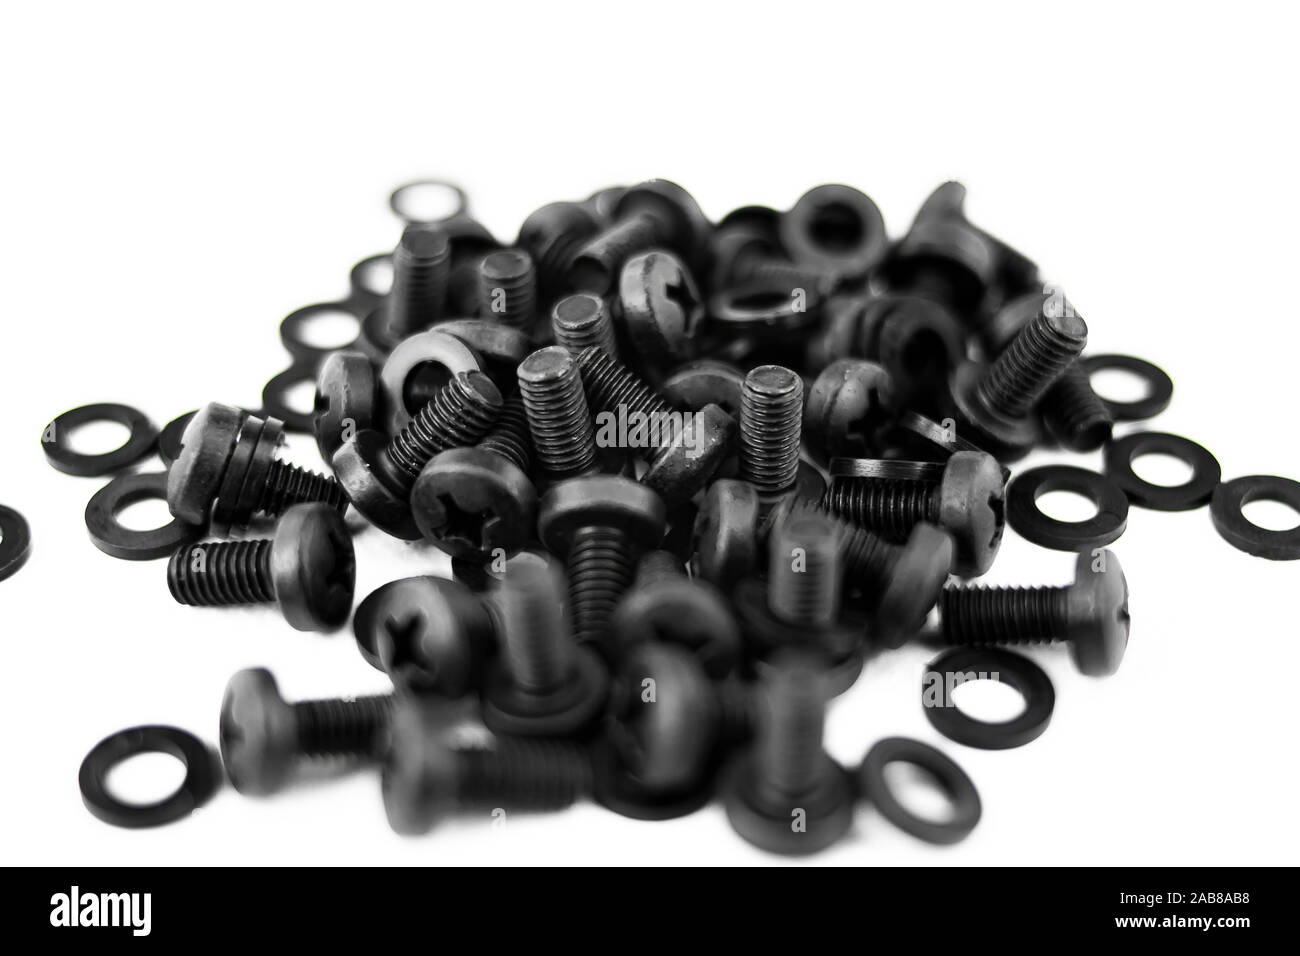 Heap of screws and black metal washers on white background Stock Photo